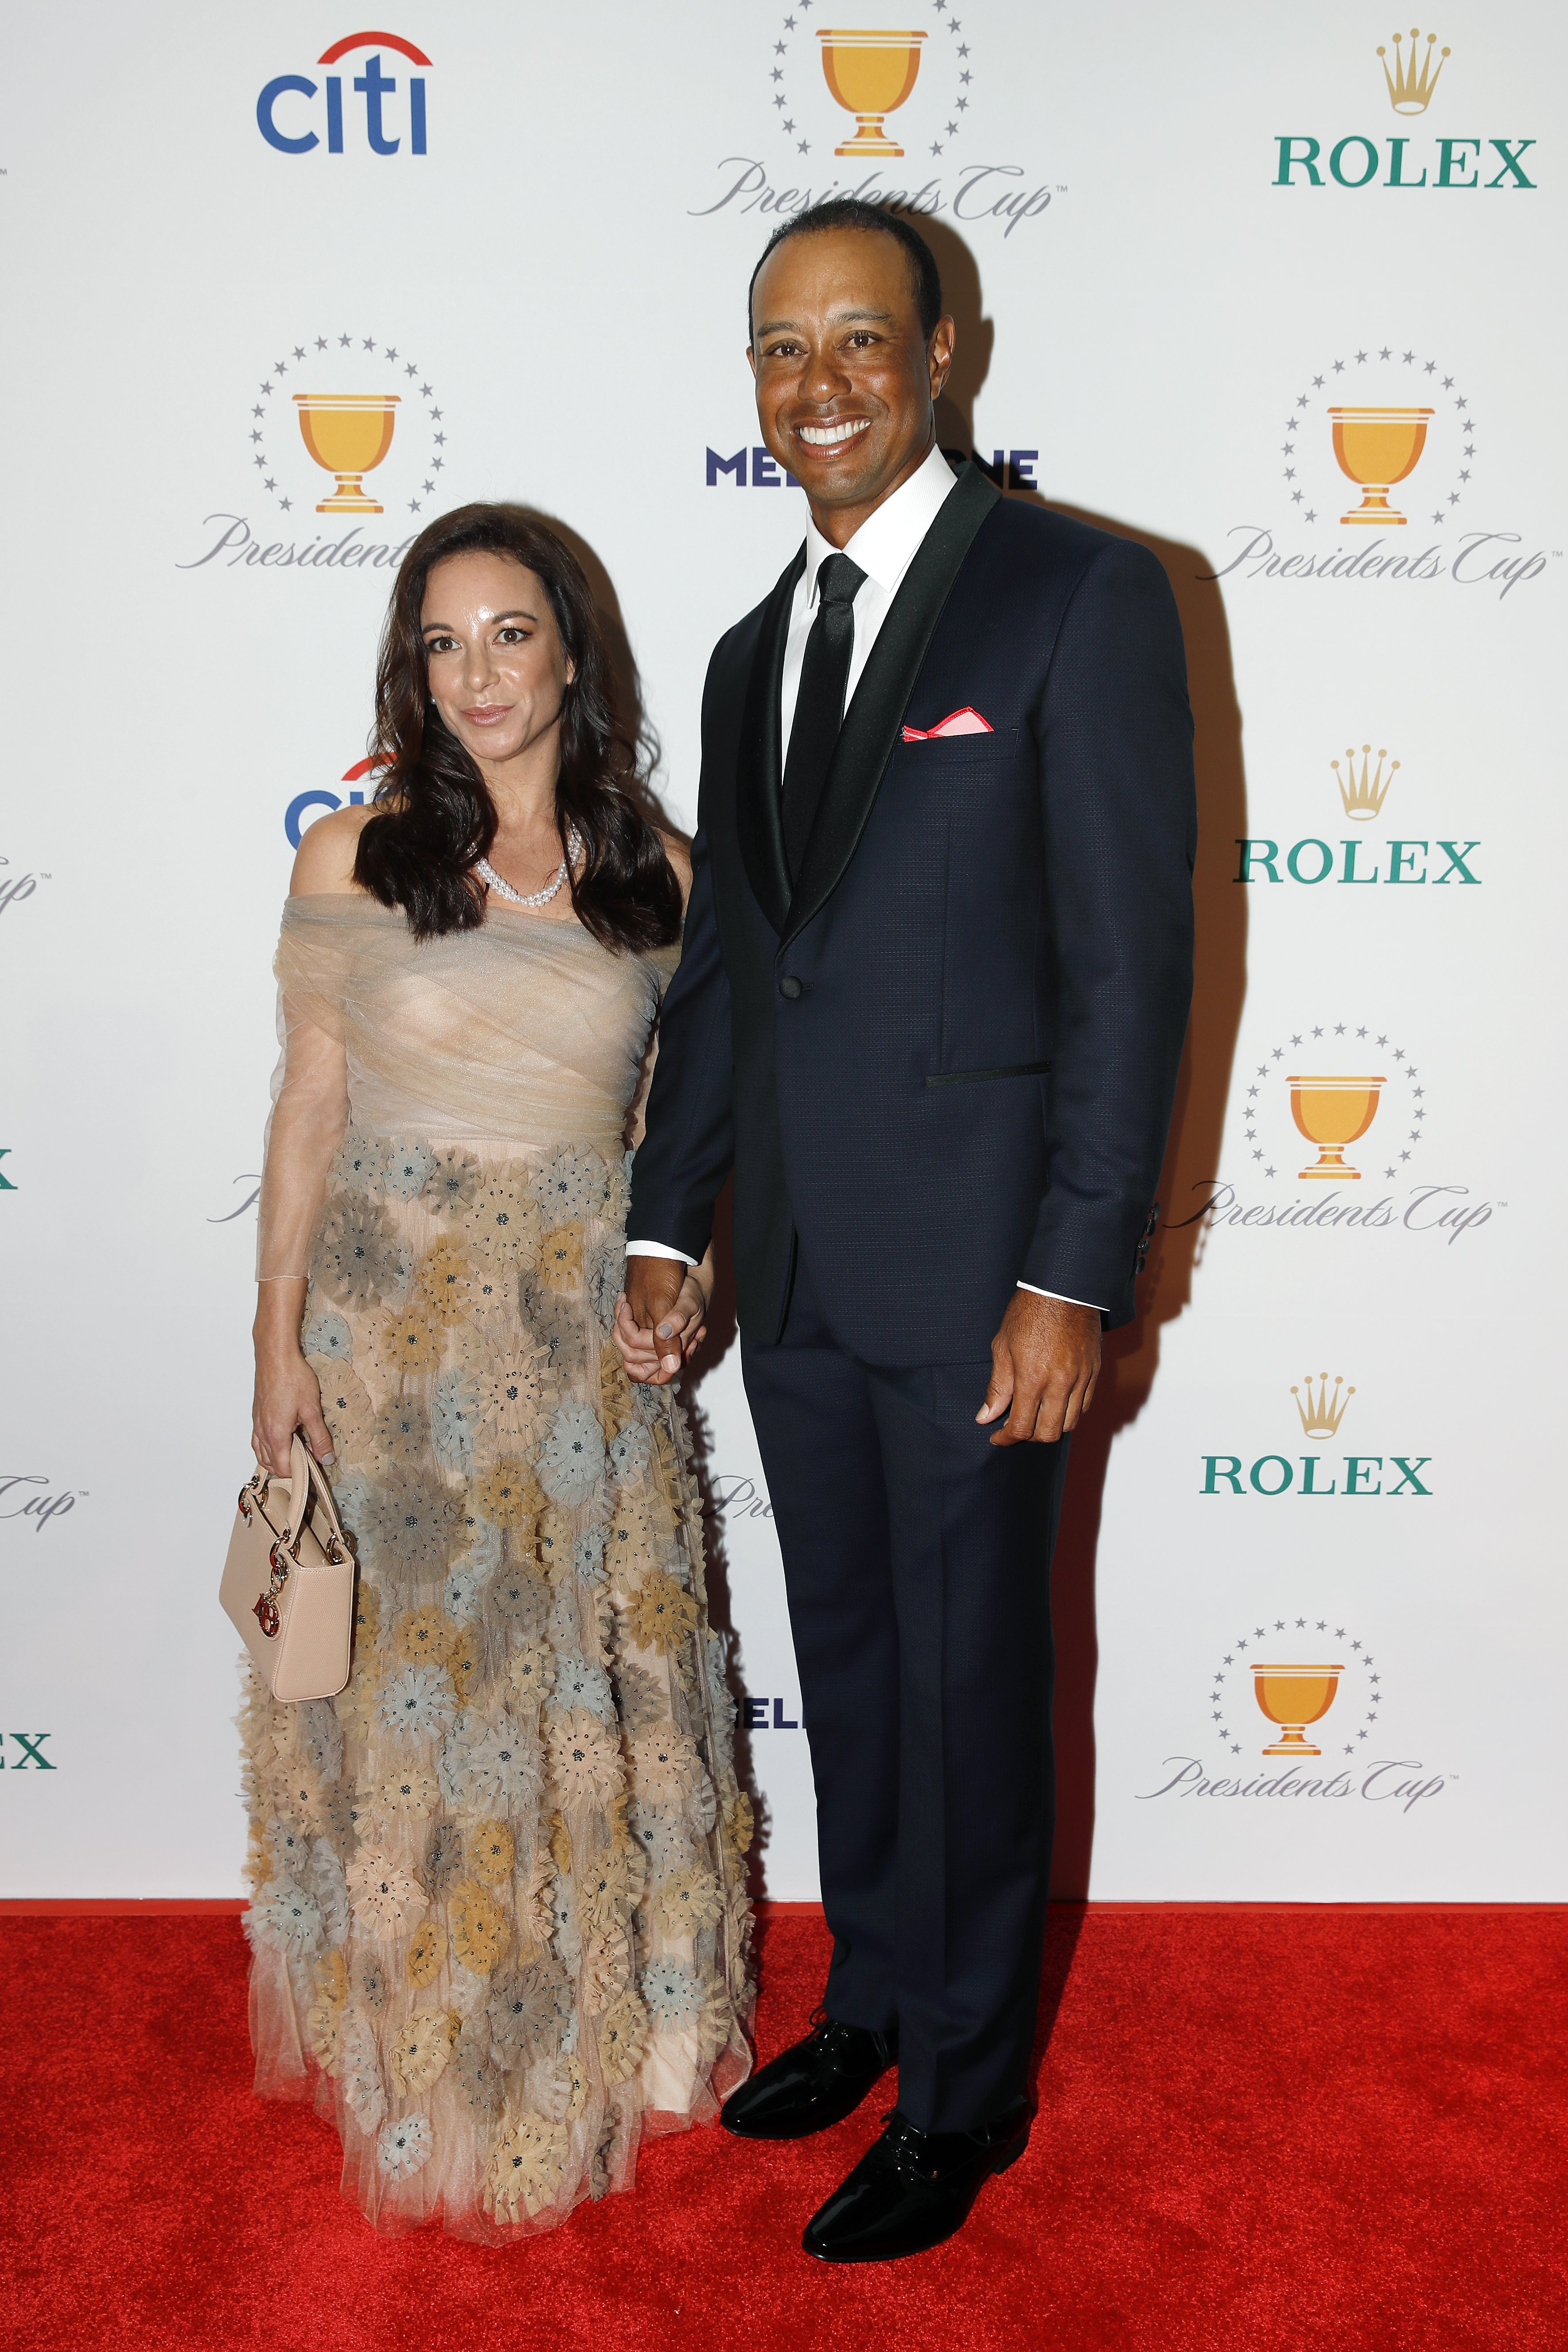 Tiger Woods and his girlfriend, Erica Herman, pose on the red carpet during the Presidents Cup Gala prior to Presidents Cup at The Royal Melbourne Golf Club on December 10, 2019, in Melbourne, Australia. | Source: Getty Images